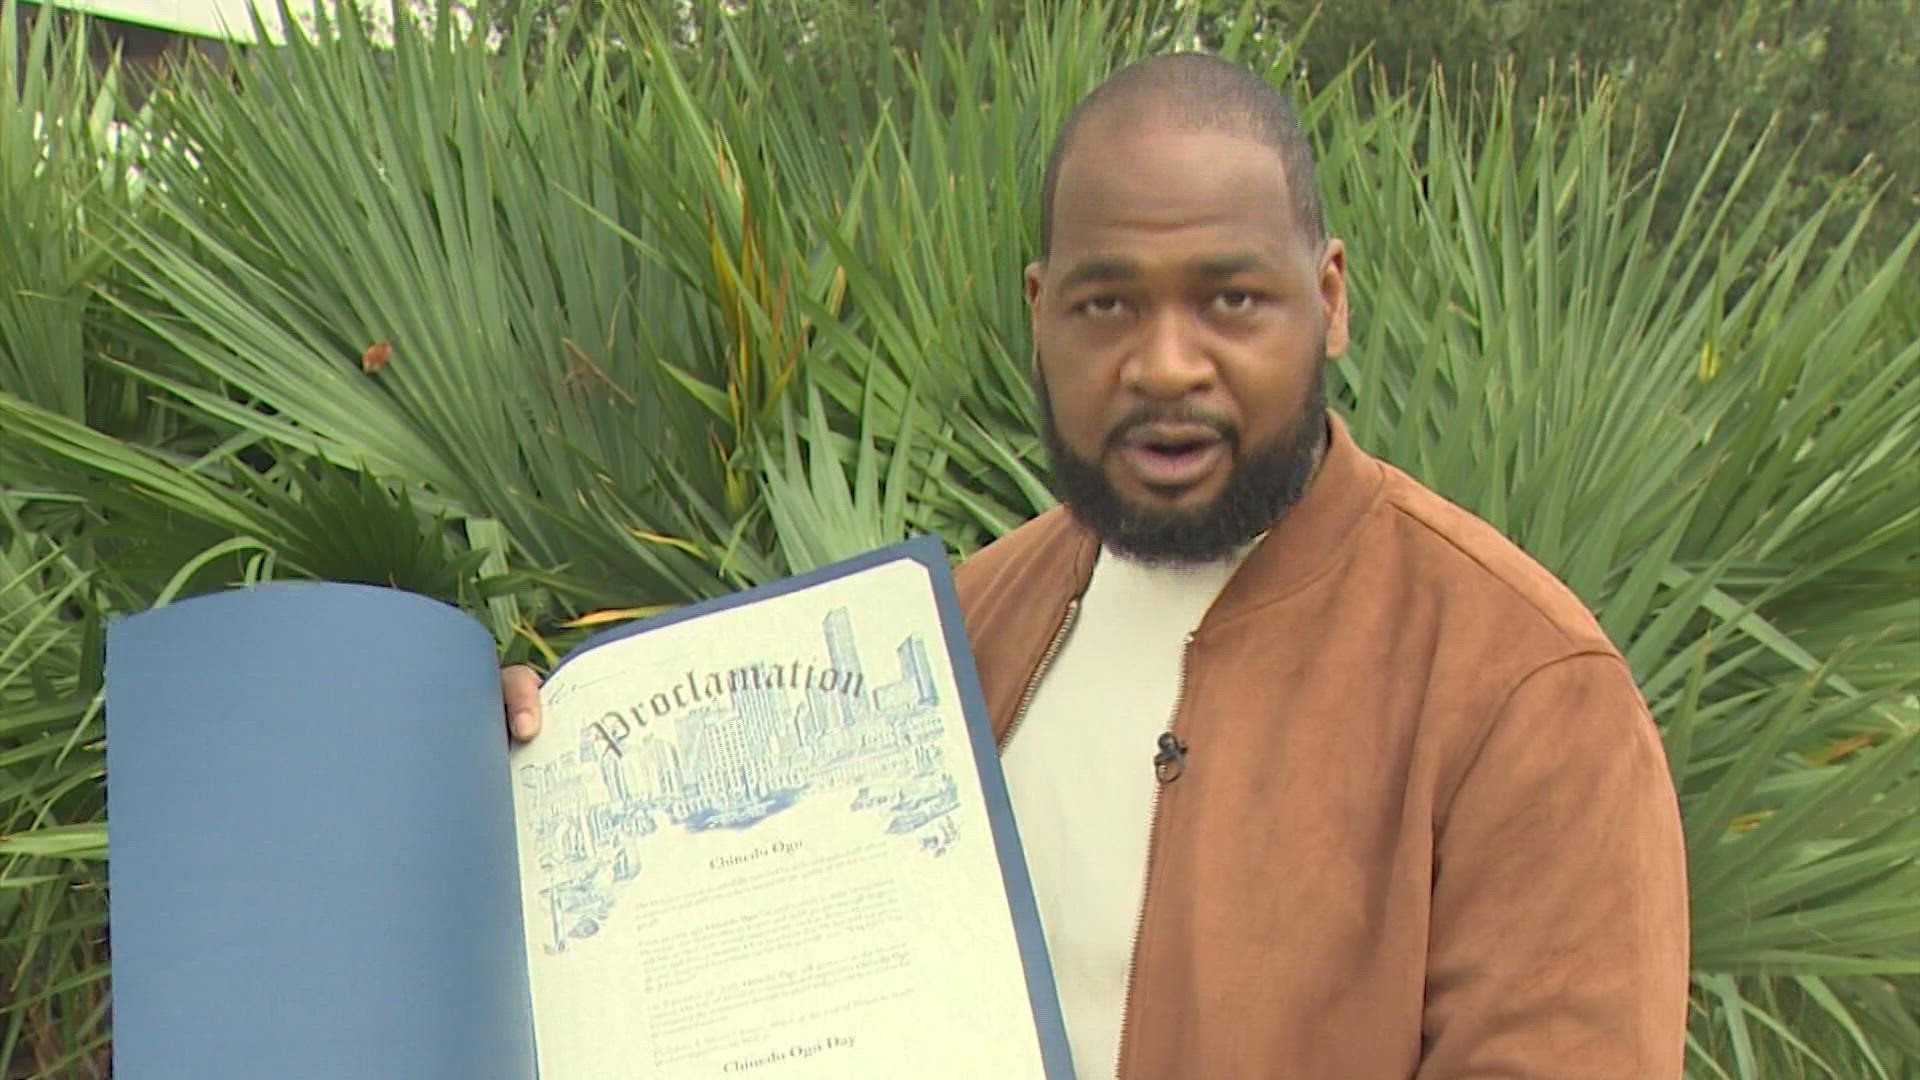 A special honor for a familiar face here on KHOU 11. Our friend and comedian Chinedu Ogu is getting a very special honor, thanks to the city of Houston.